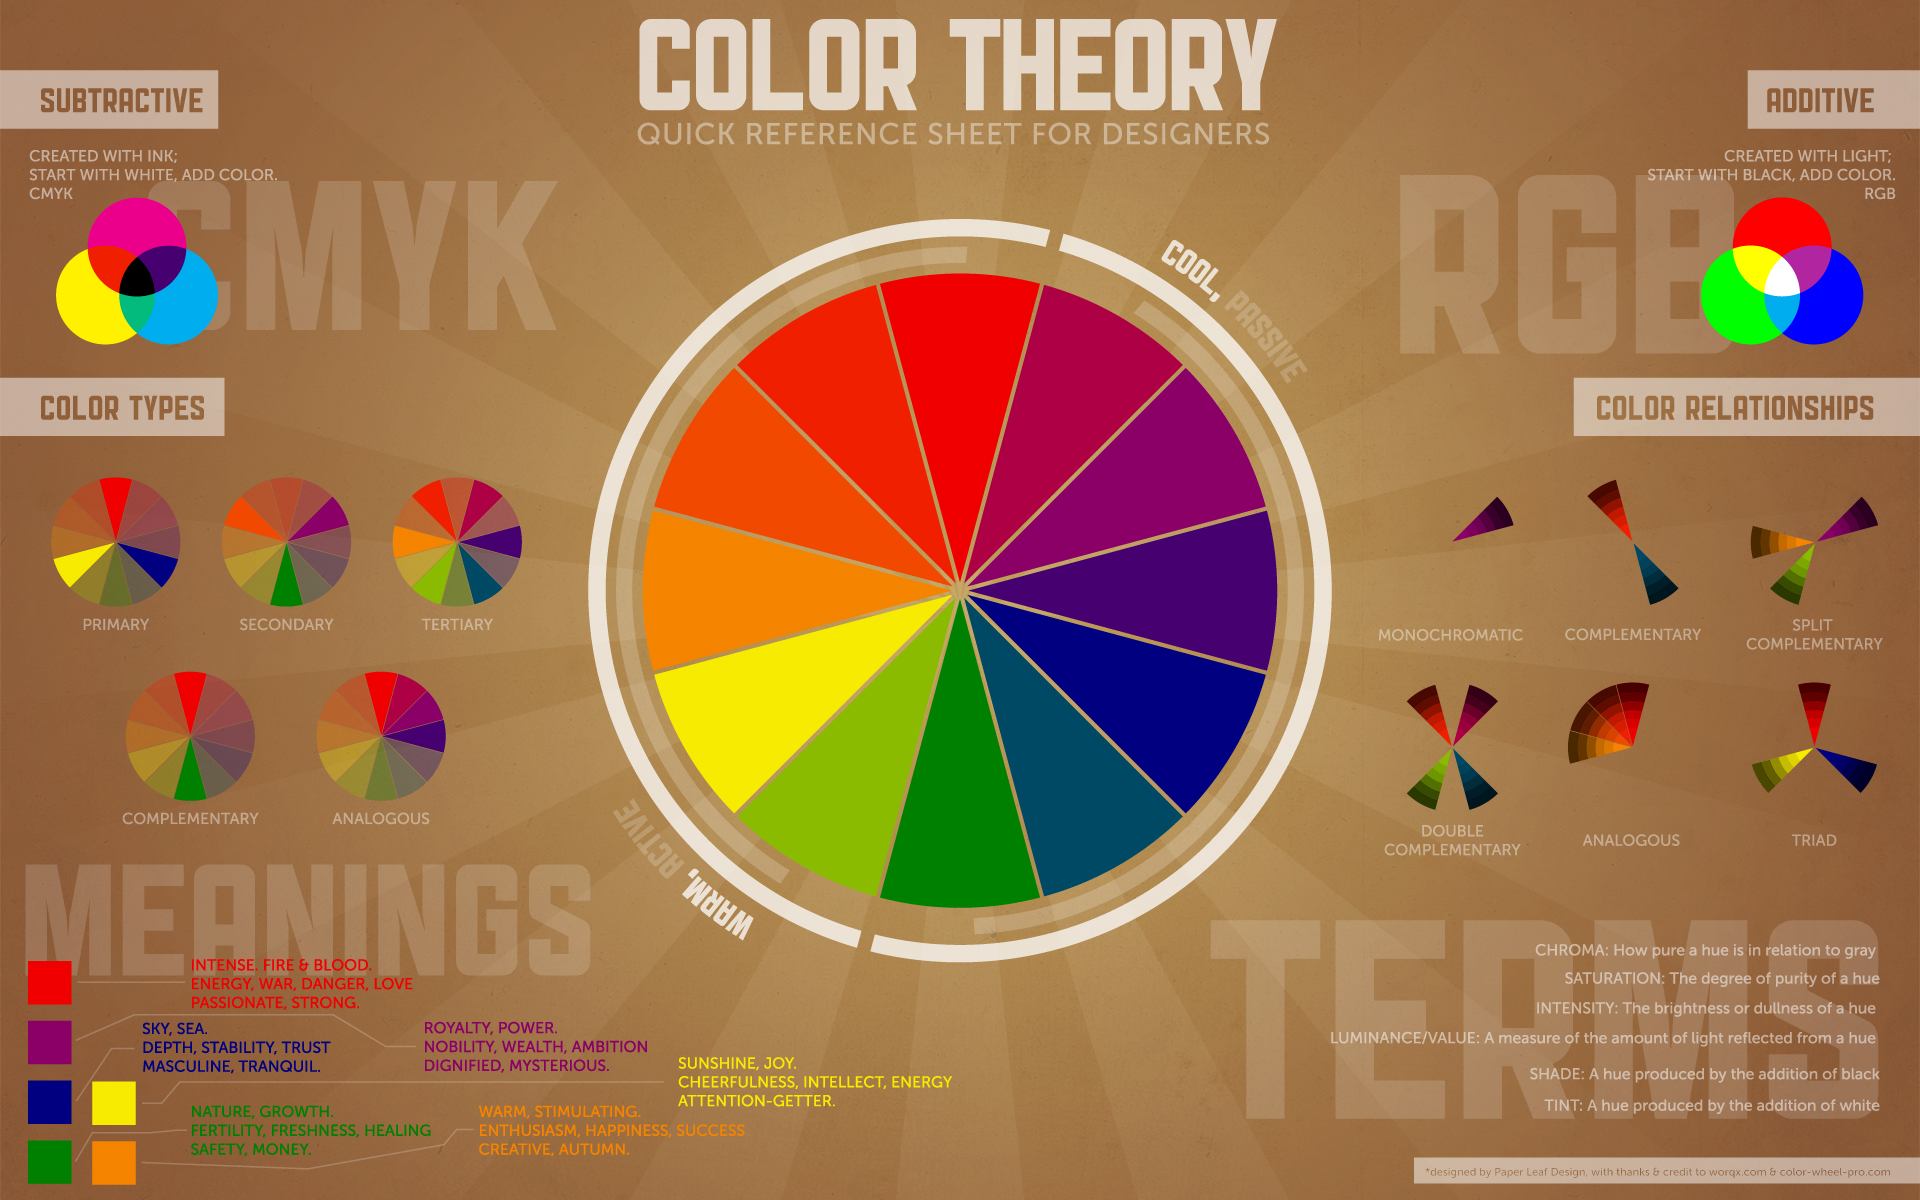 Color Theory Infographic from paper-leaf.com - a great overview!